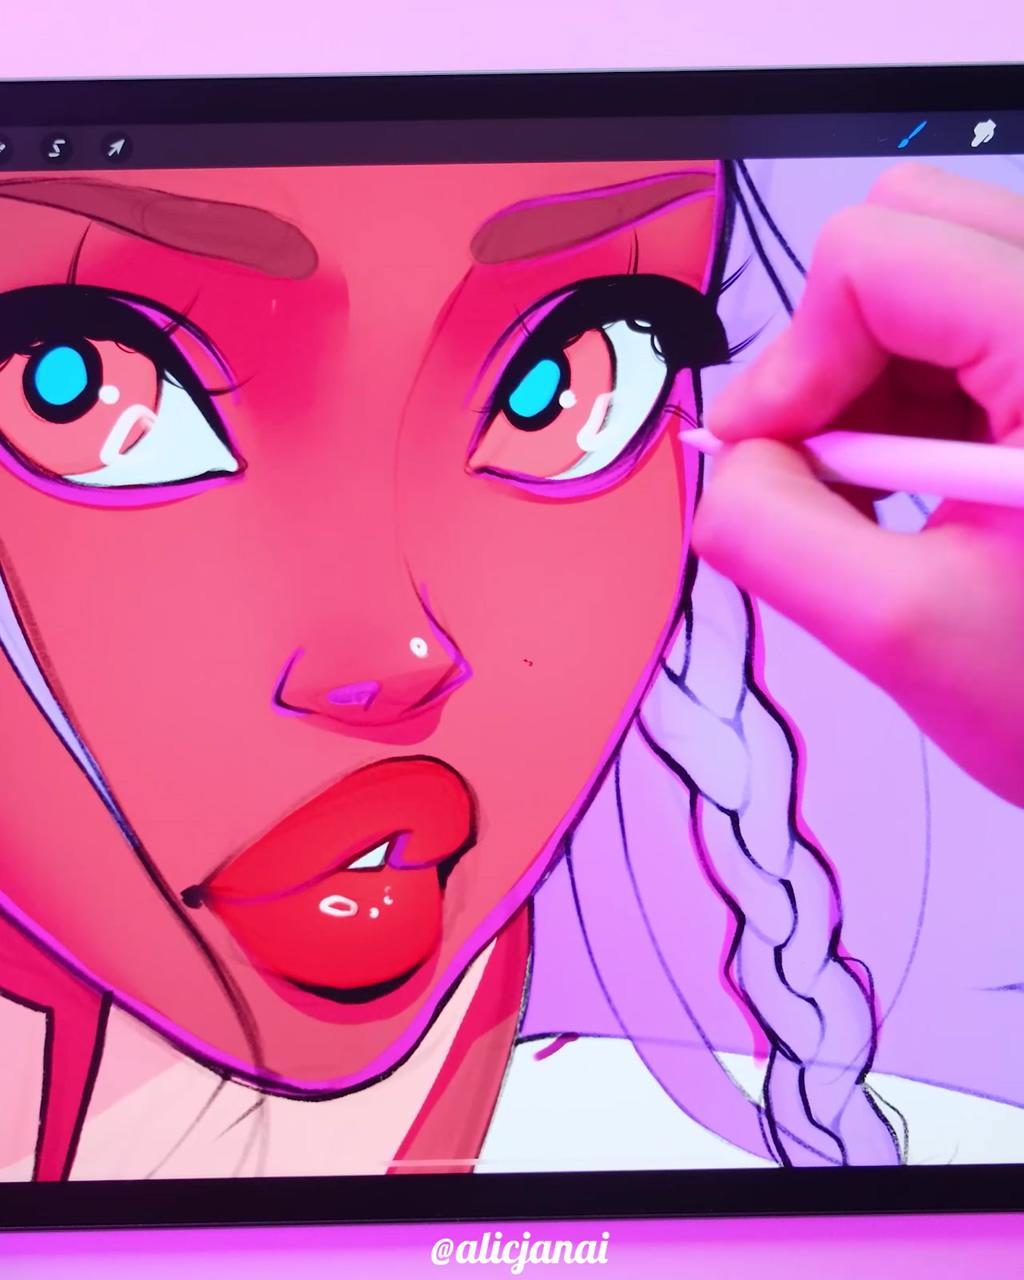 Coloring an oc on procreate by alicja nai; coloring on procreate by alicjanai